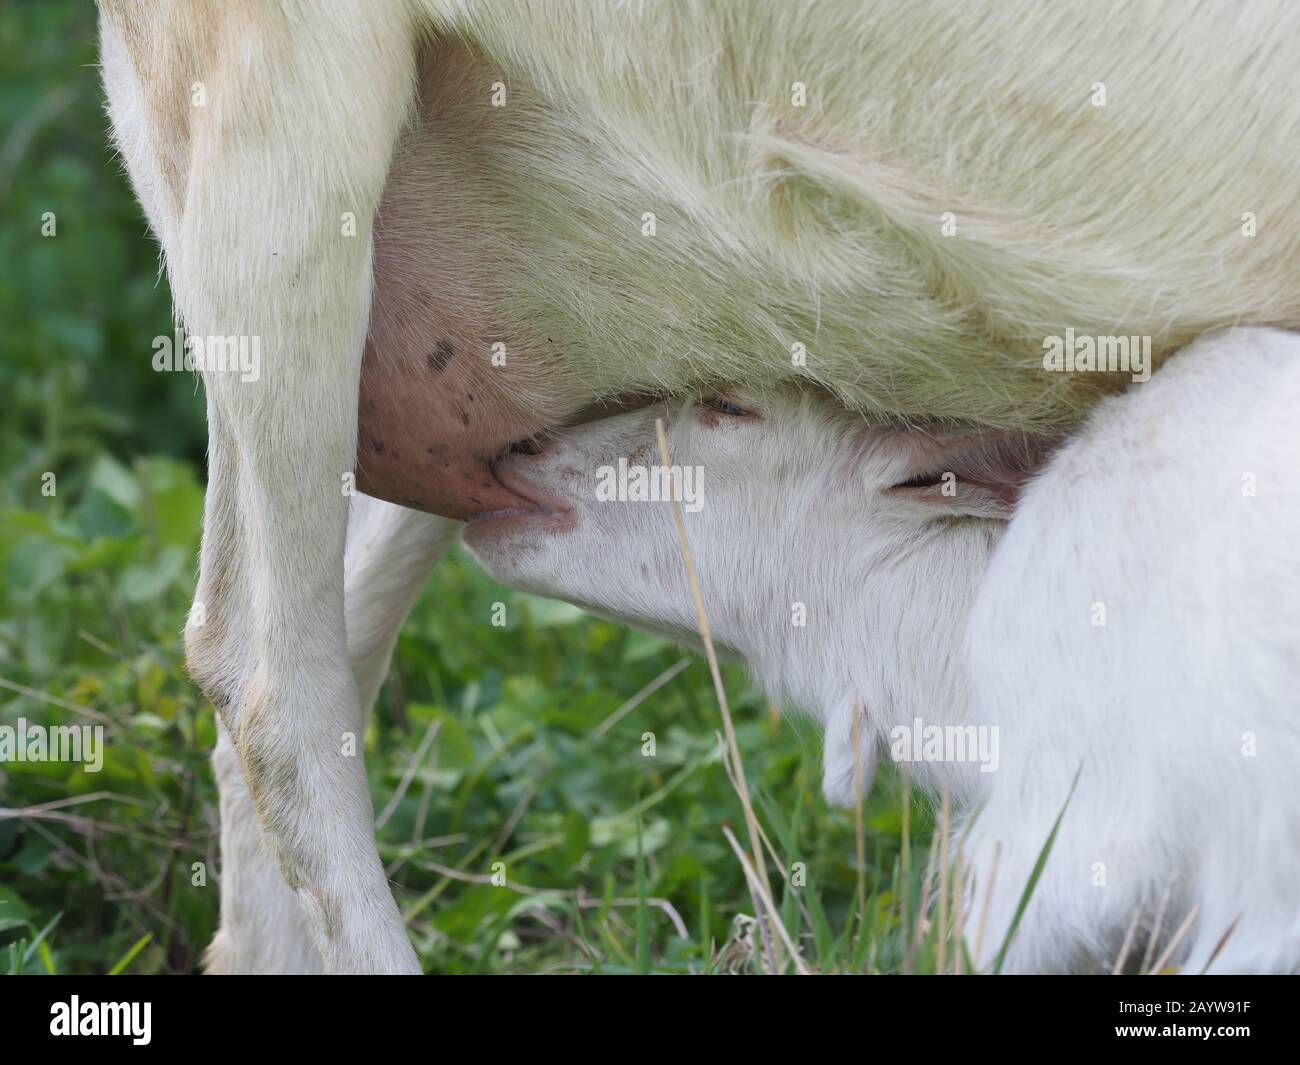 A cute white baby goat suckles from its mother Stock Photo